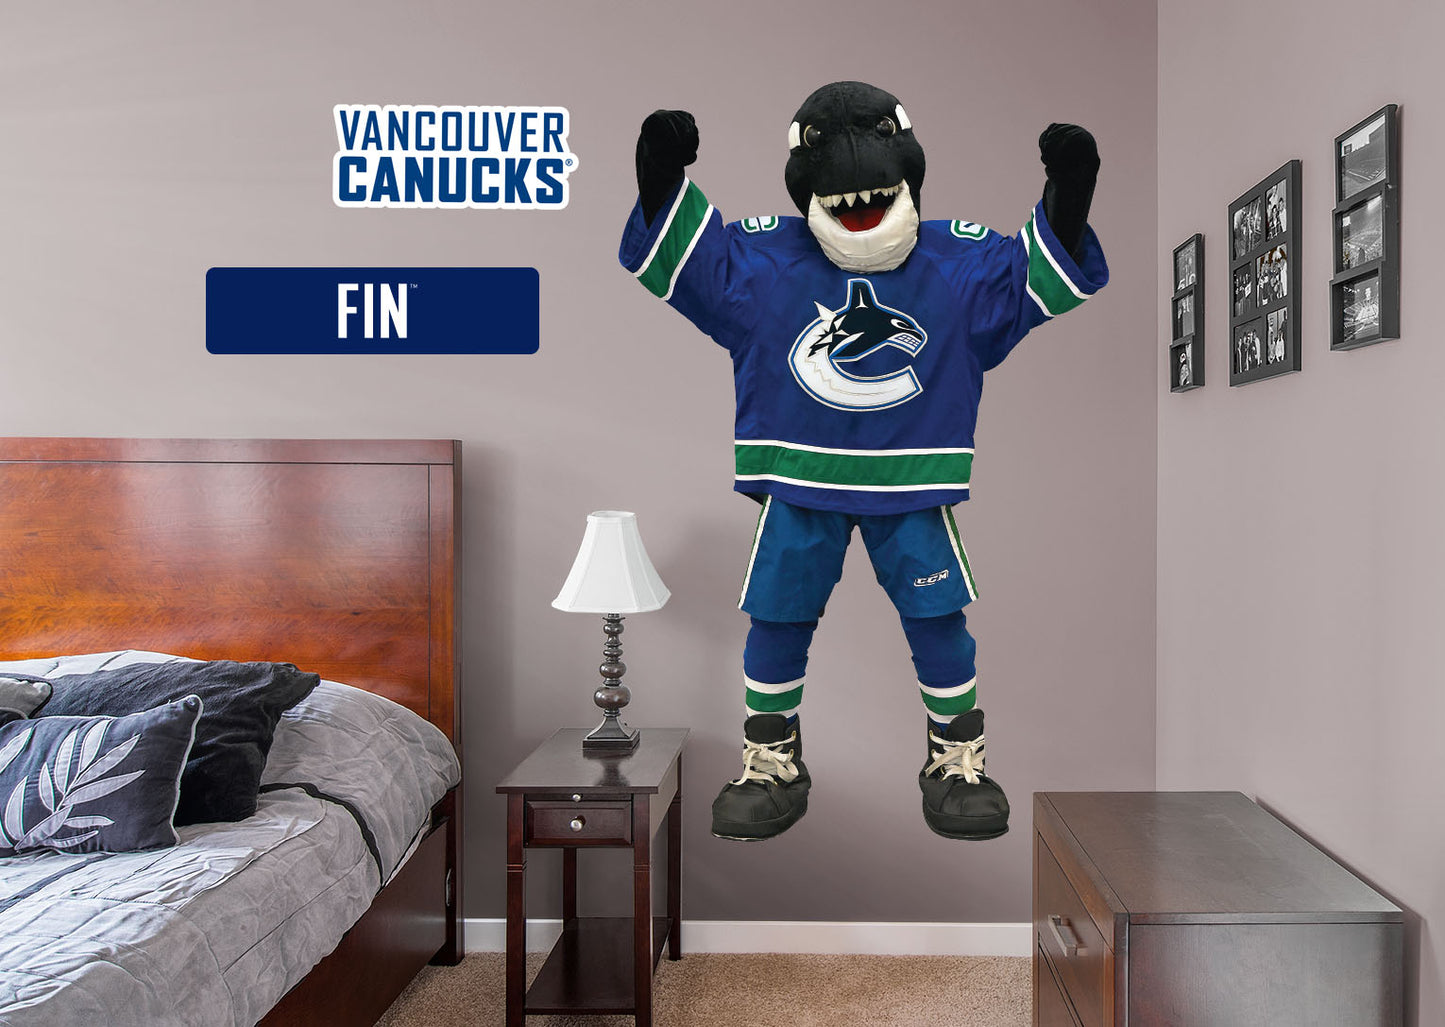 Vancouver Canucks: Fin  Mascot        - Officially Licensed NHL Removable Wall   Adhesive Decal